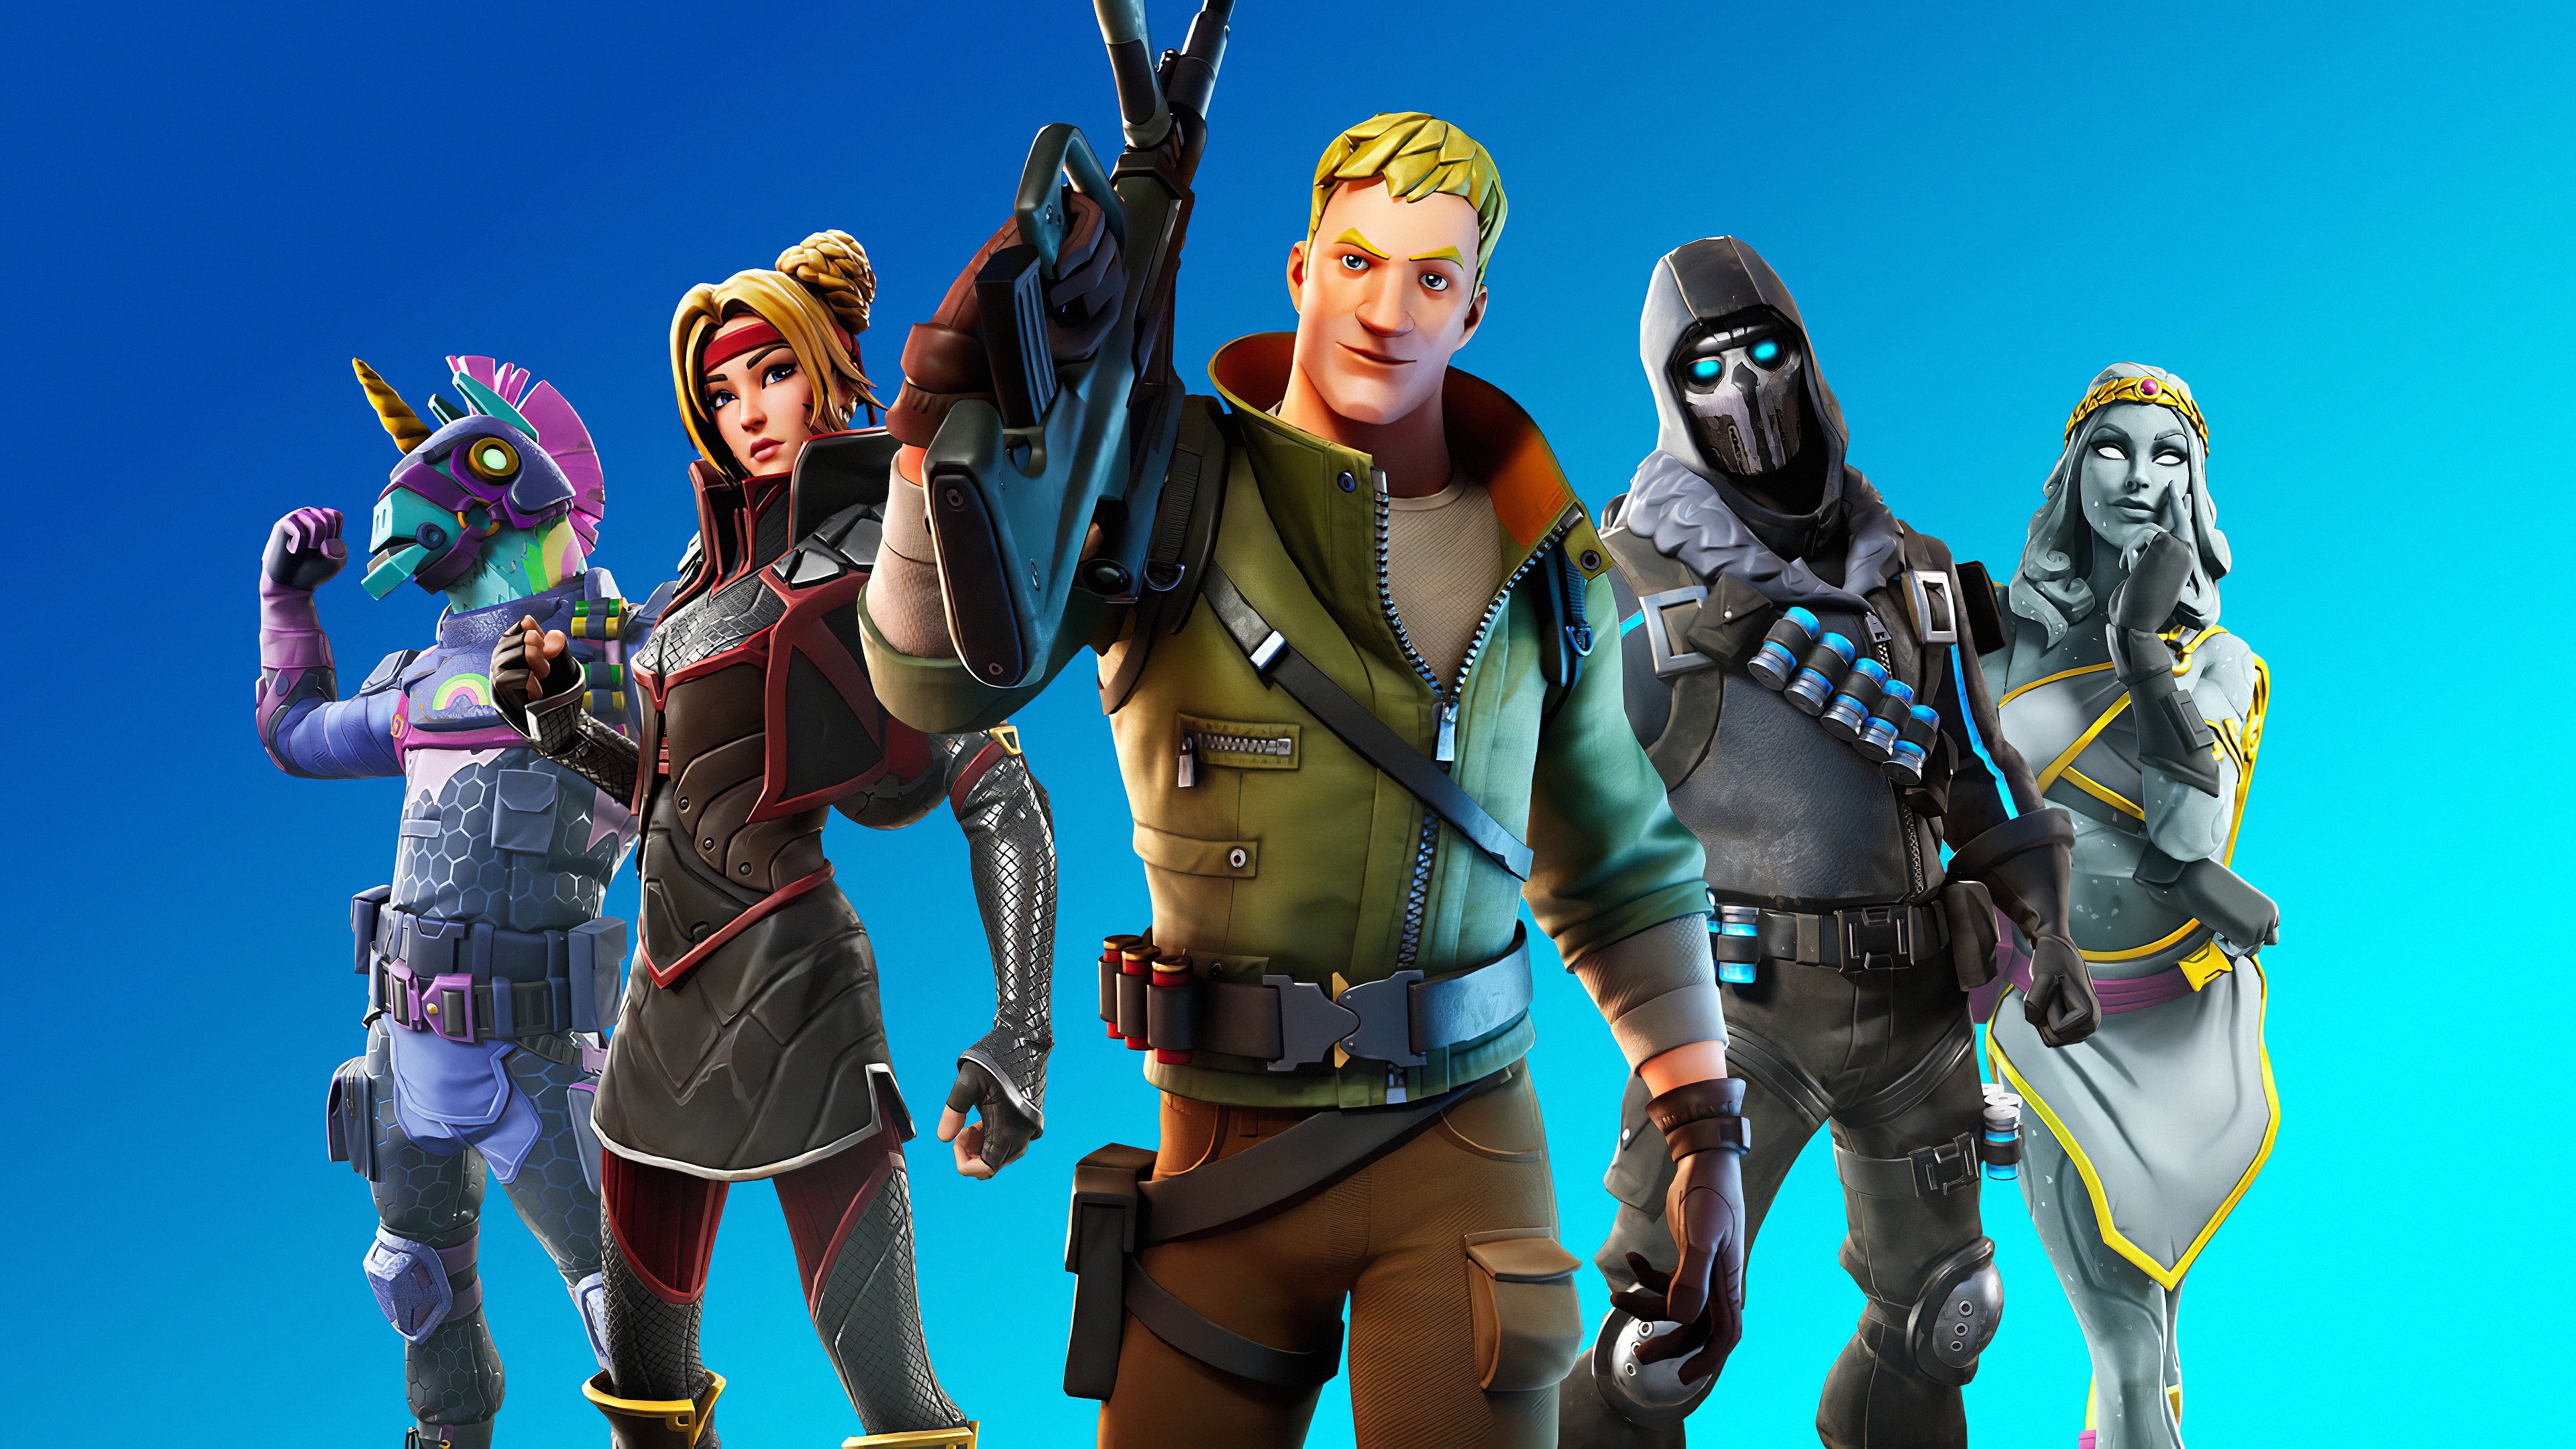 Fortnite Group Wallpaper, HD Games 4K Wallpapers, Images and Background ...